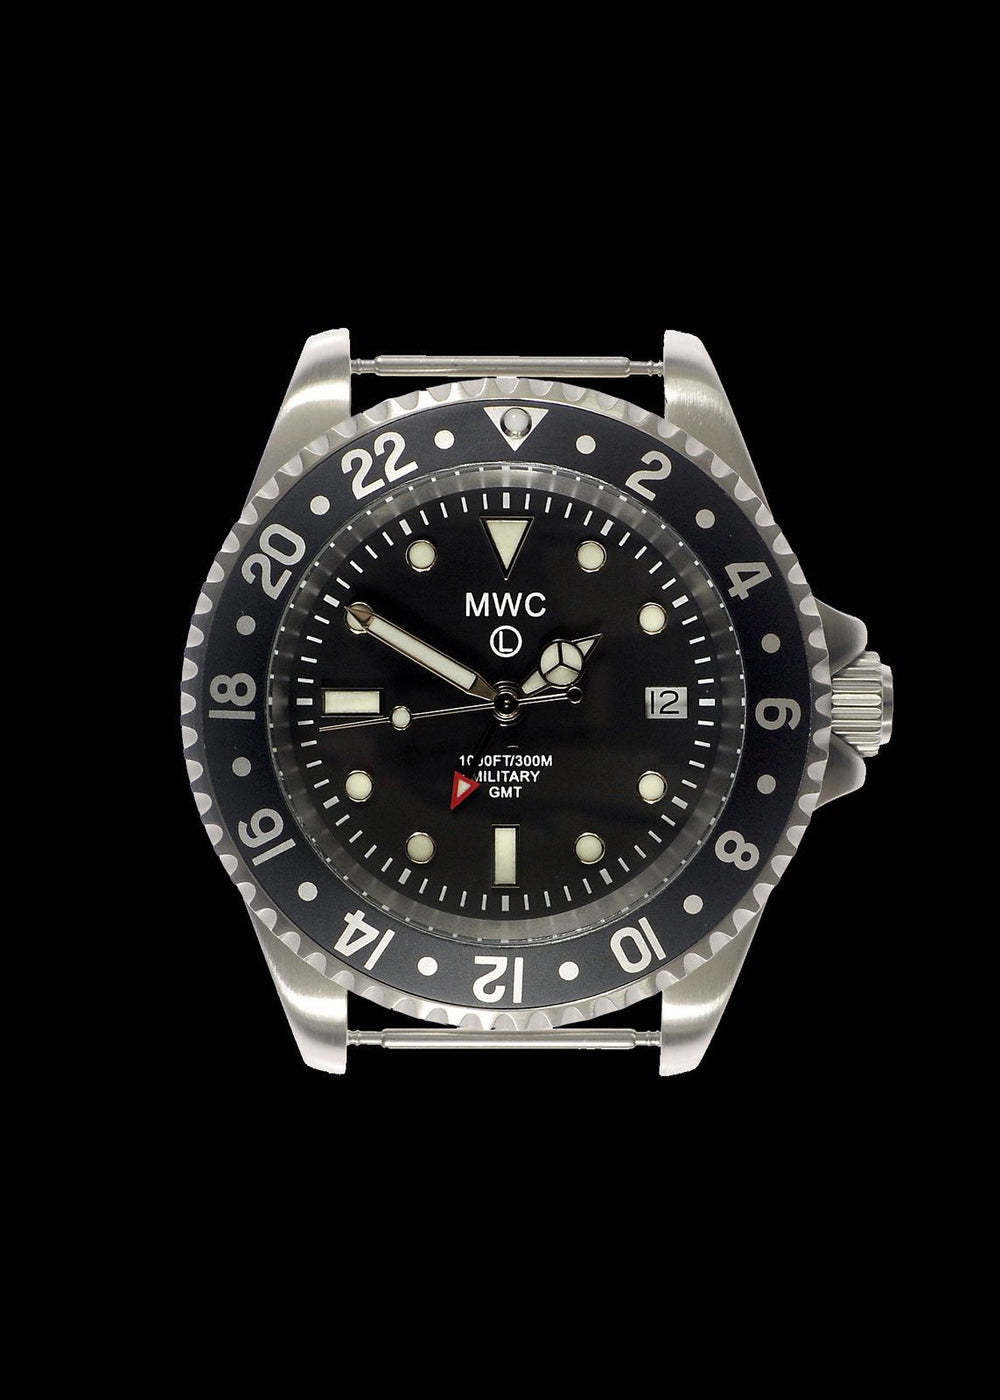 MWC Classic Watch - GMT Dual Timezone Stainless Steel Military Watch on NATO Strap